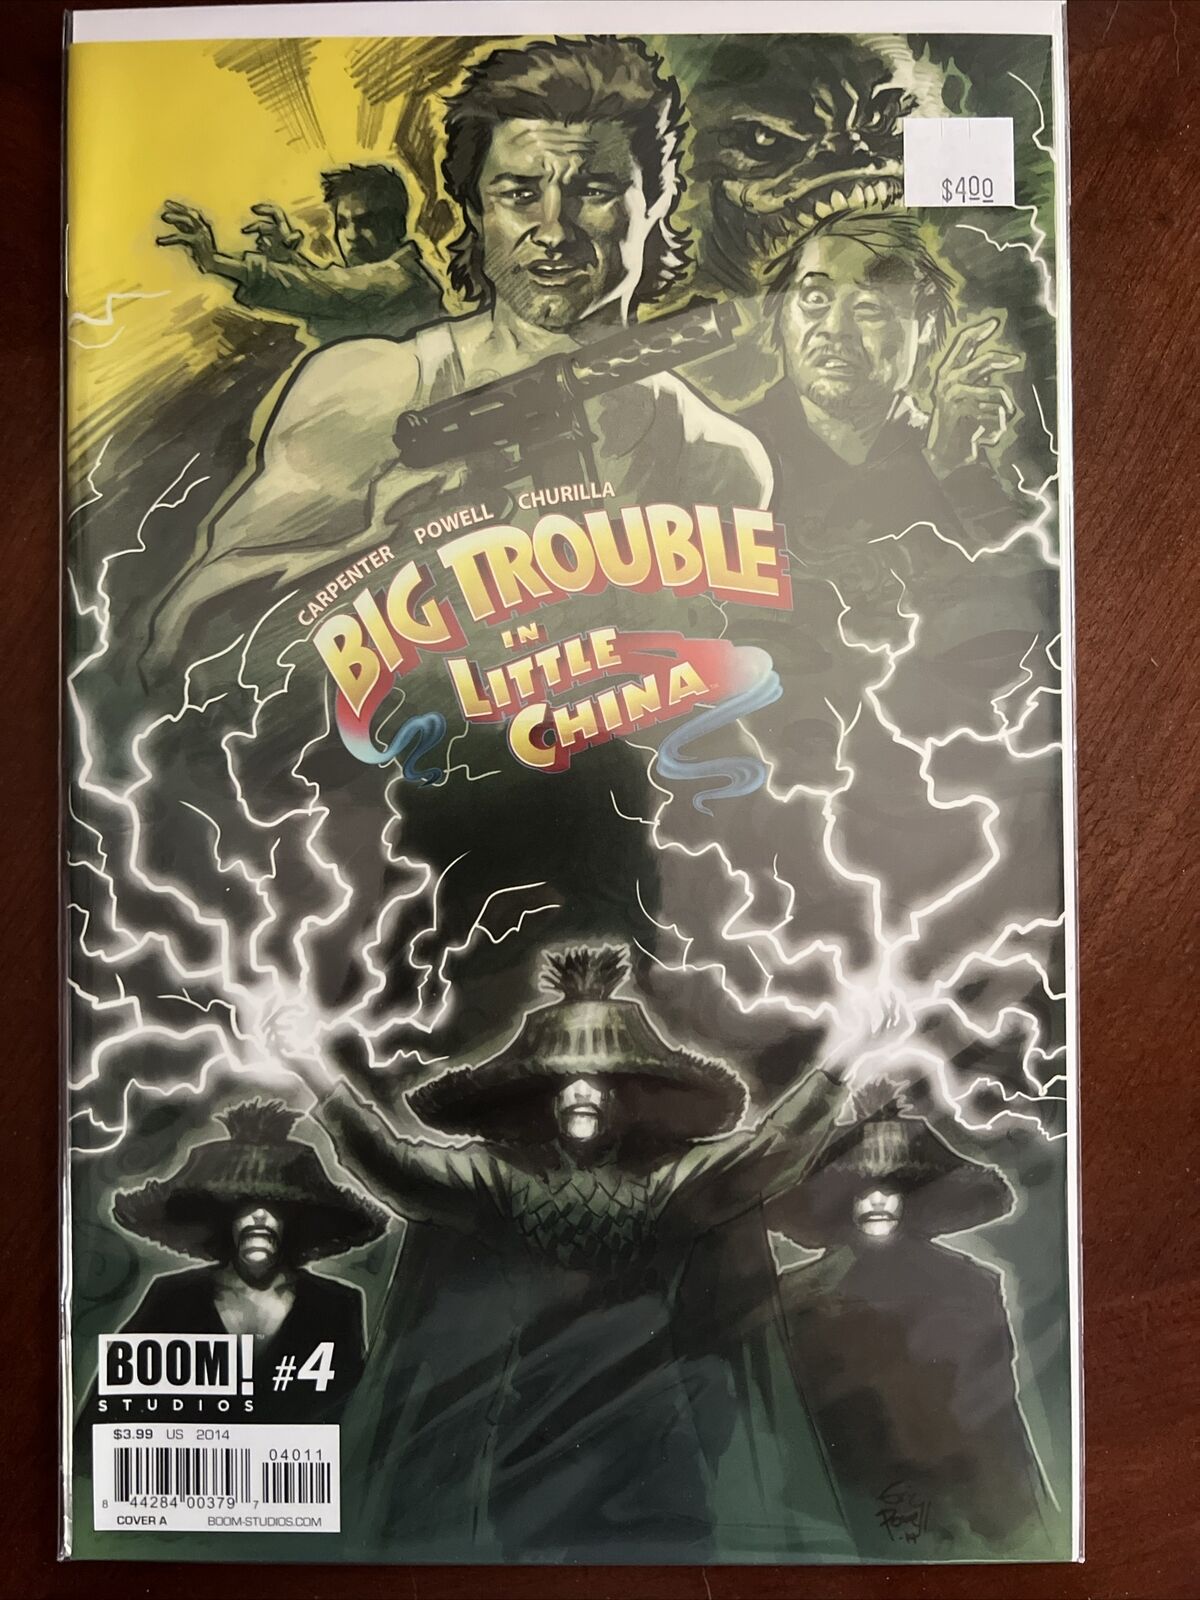 BIG TROUBLE IN LITTLE CHINA 4 ERIC POWELL COVER BOOM STUDIOS 2014